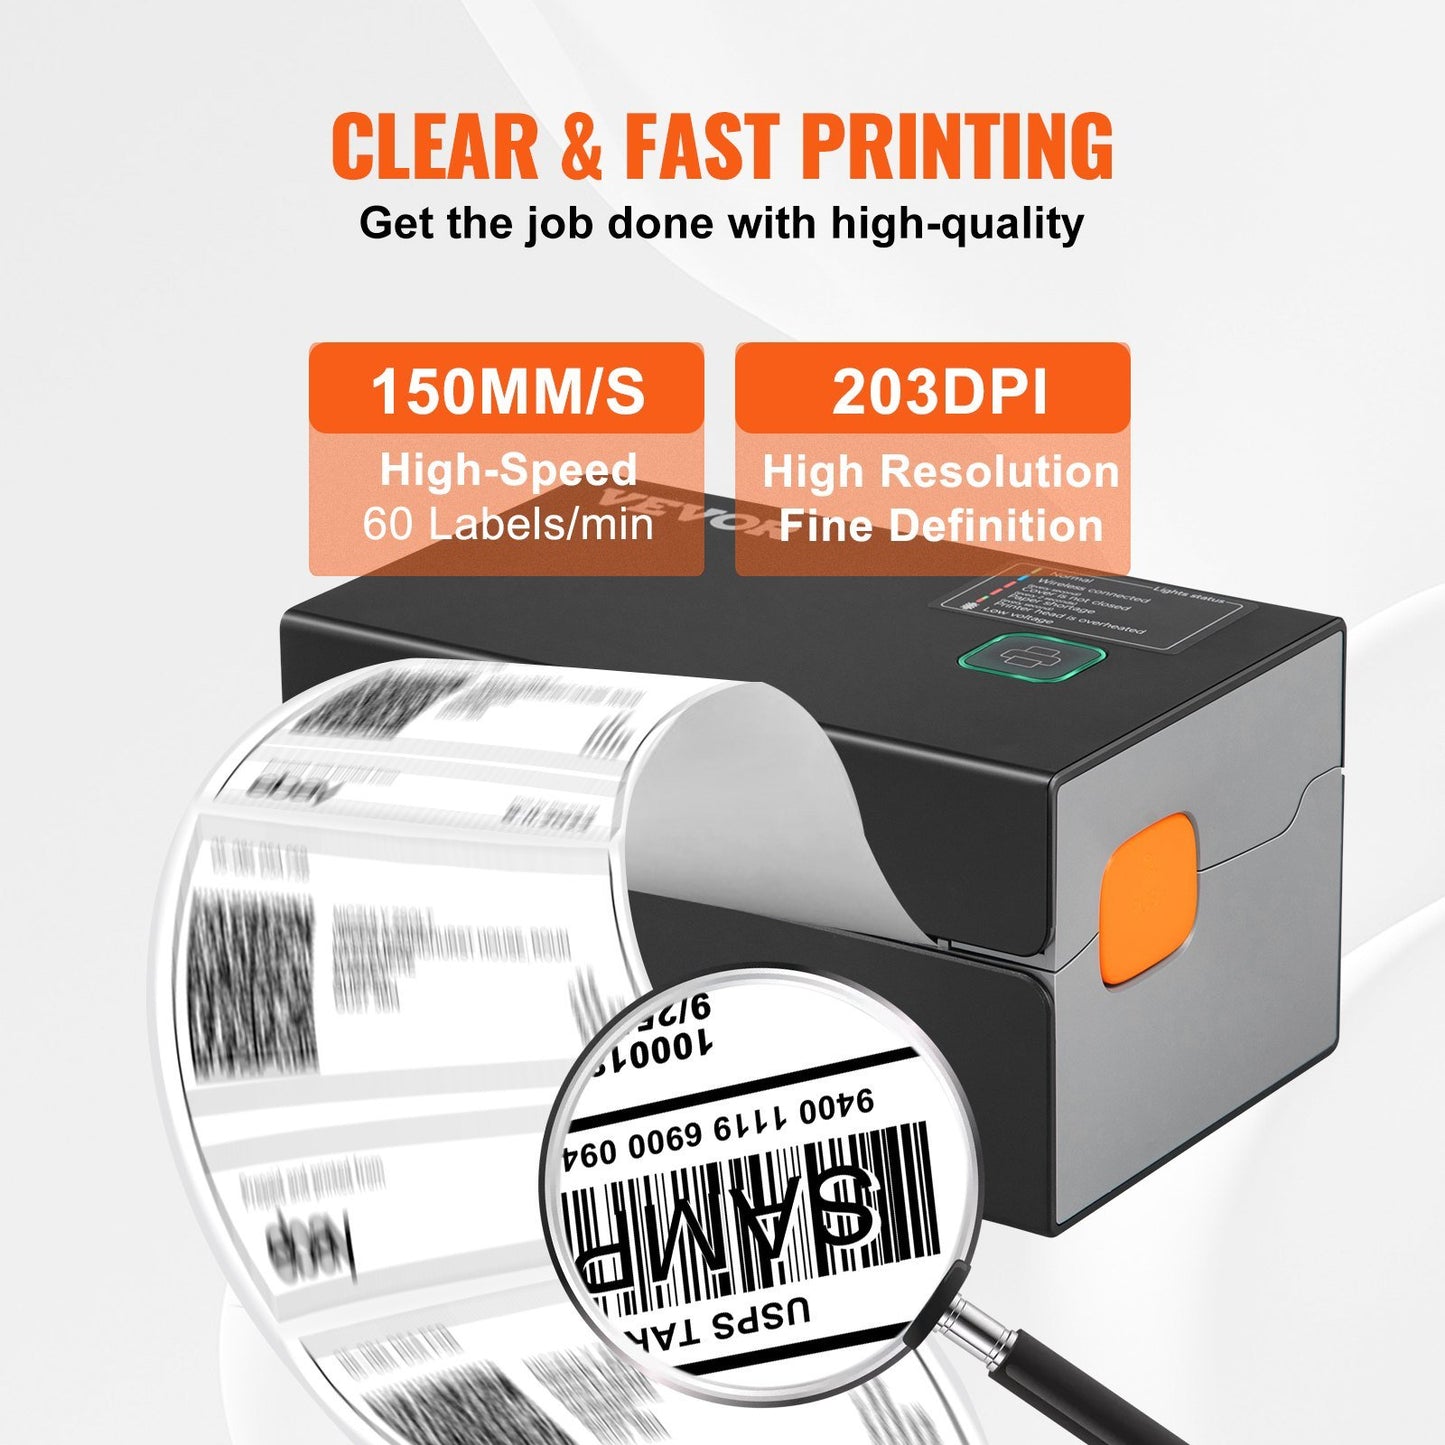 VEVOR 300DPI Bluetooth Thermal Label Printer w/Auto Recognition & Rohm Printer Head, Wireless Shipping Label Printer for 1.57" - 4.25" Width Labels,Thermal Printer Supports Shipping, Barcode and More